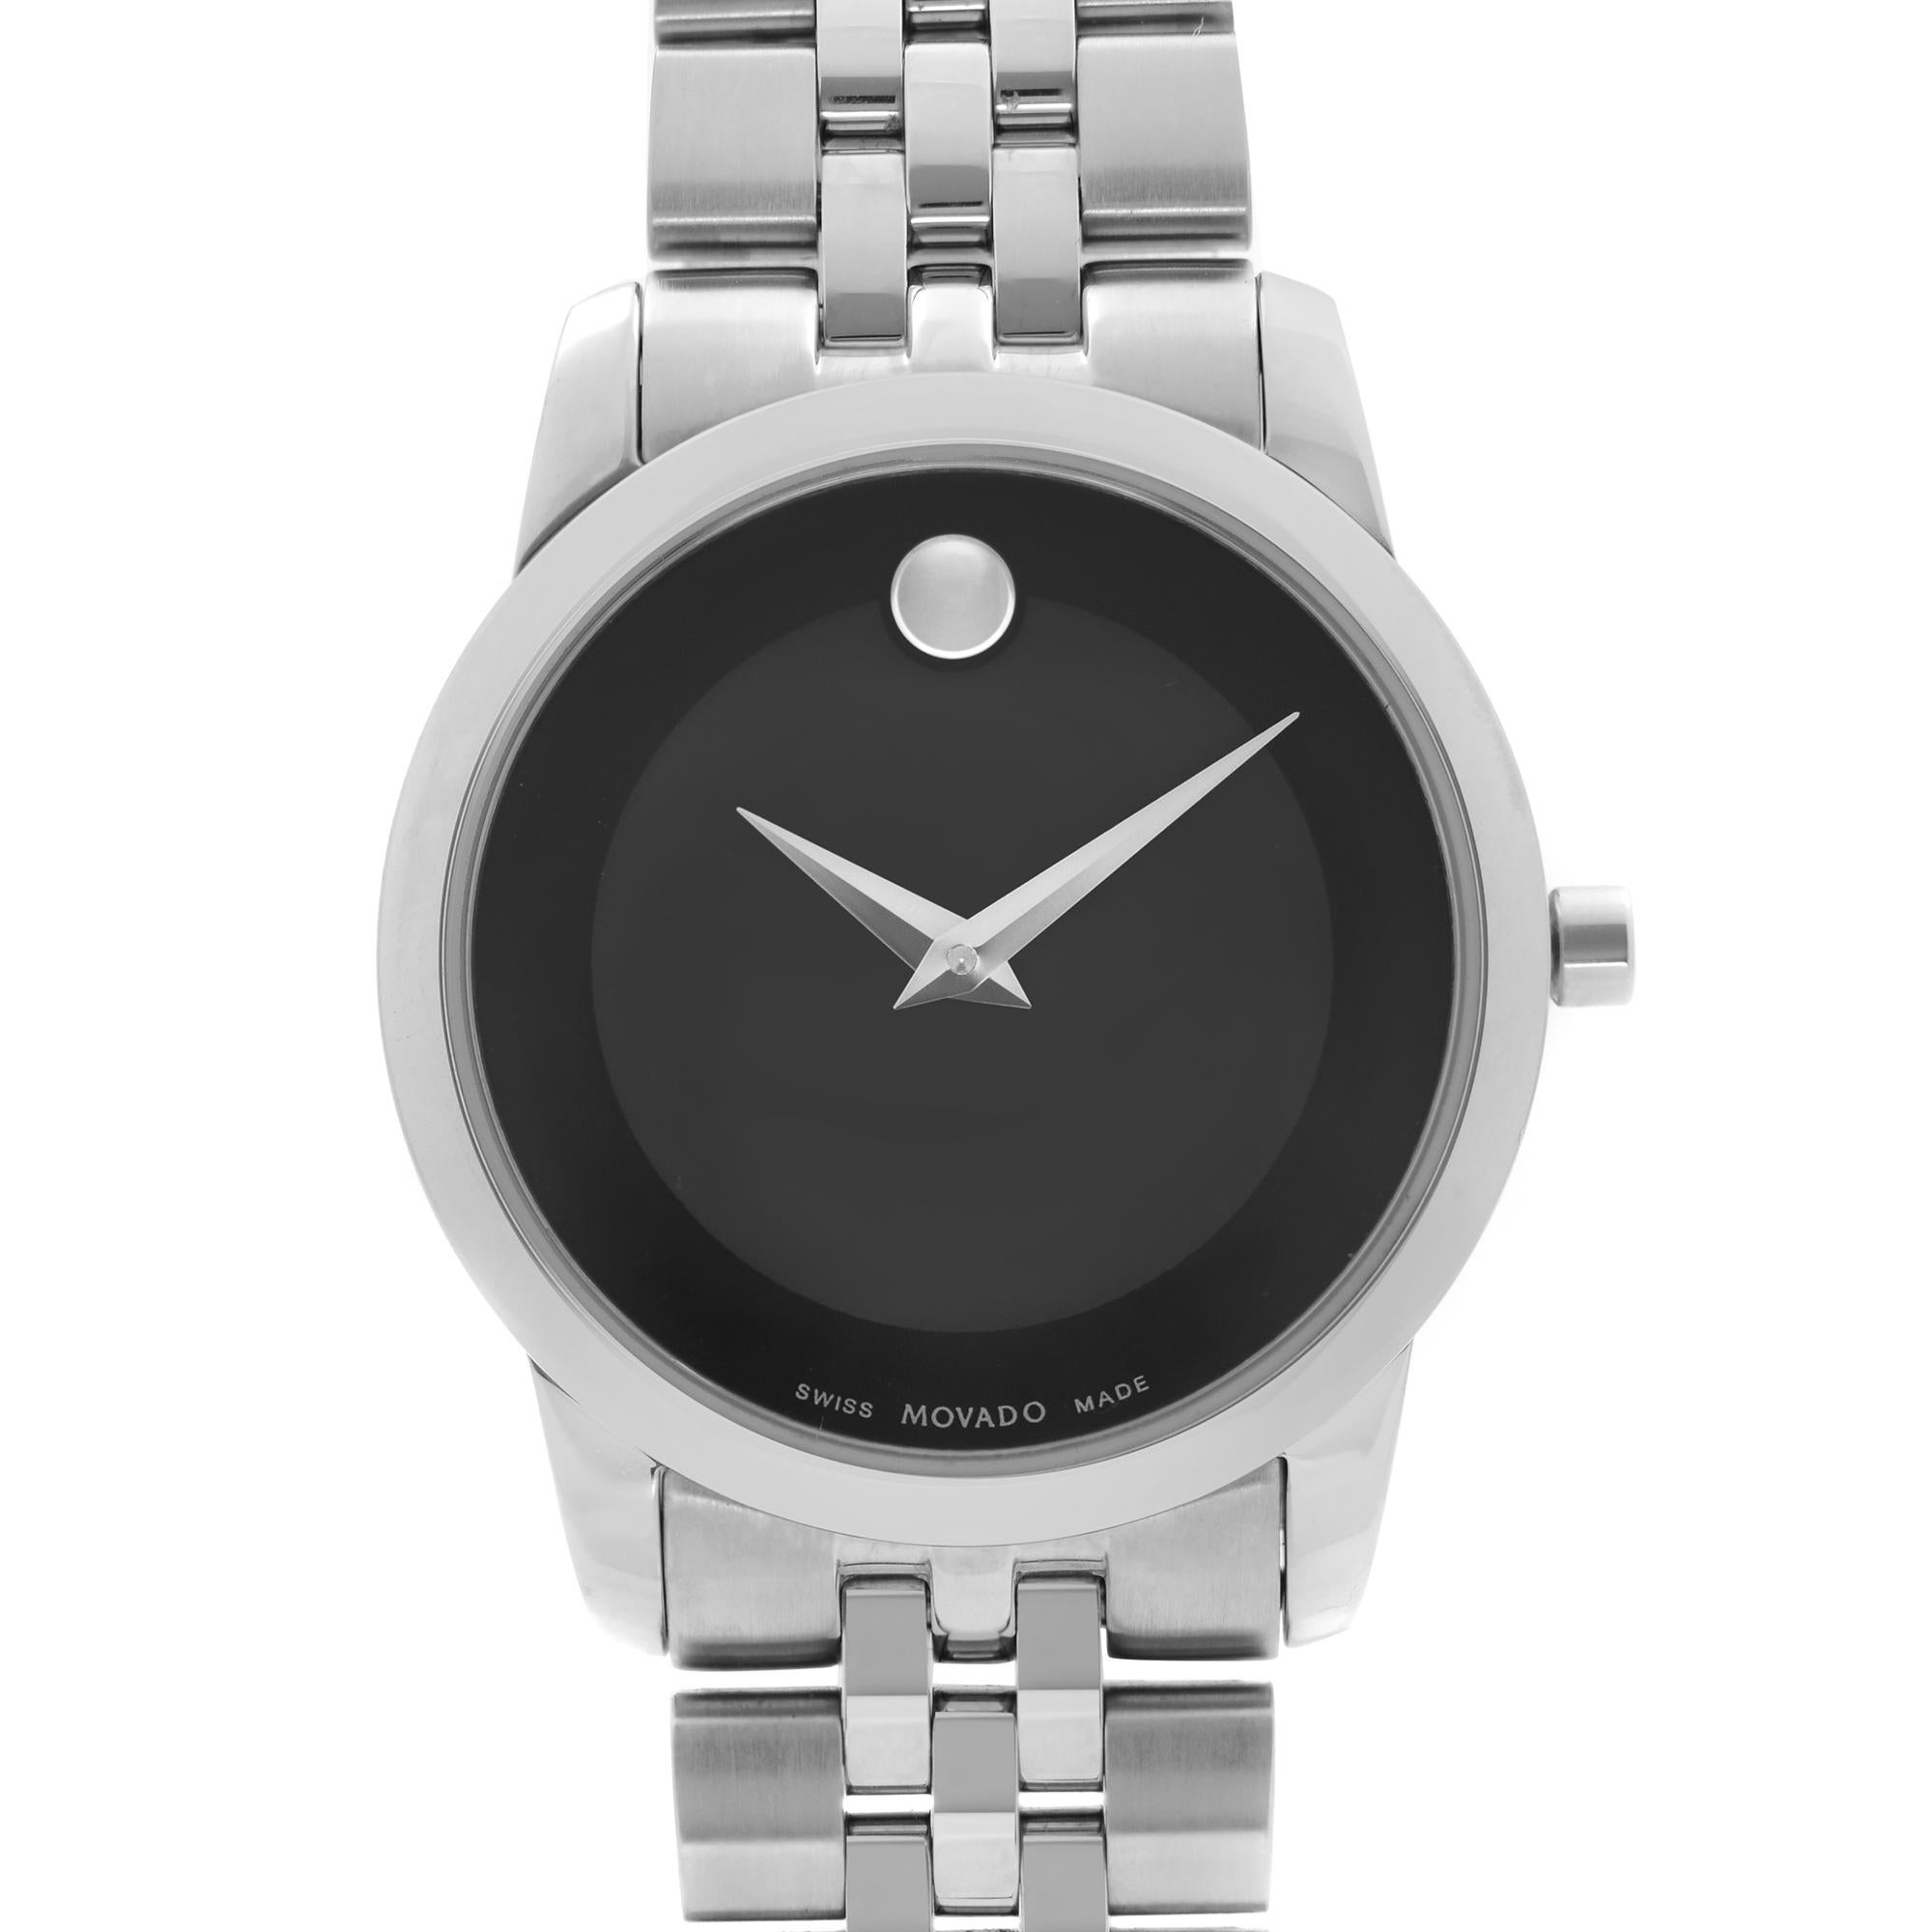 Display Model Movado Museum Stainless Steel 28 mm Black Dial Ladies Quartz Watch 0606505. This Beautiful Timepiece Features: Silver-Tone Steel Case and Bracelet, Fixed Silver-Tone Steel Bezel, Black Dial with Silver-tone Dauphine-style Hands. The